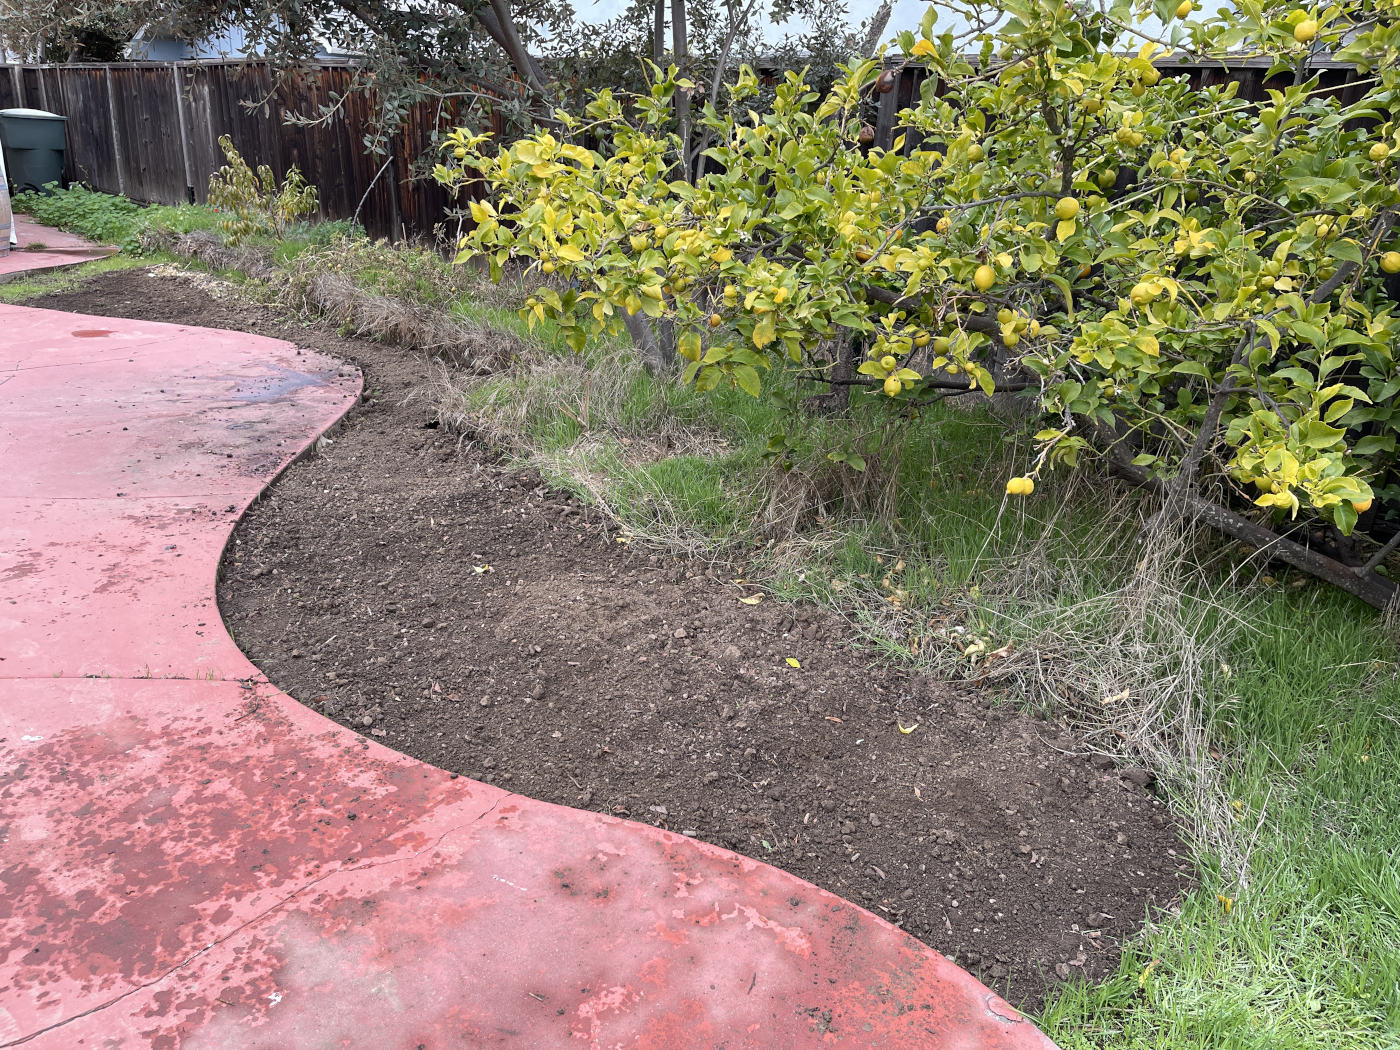 Soil filling in a bed next to a terra cotta colored cement patio. A lemon tree grows in behind the garden bed.